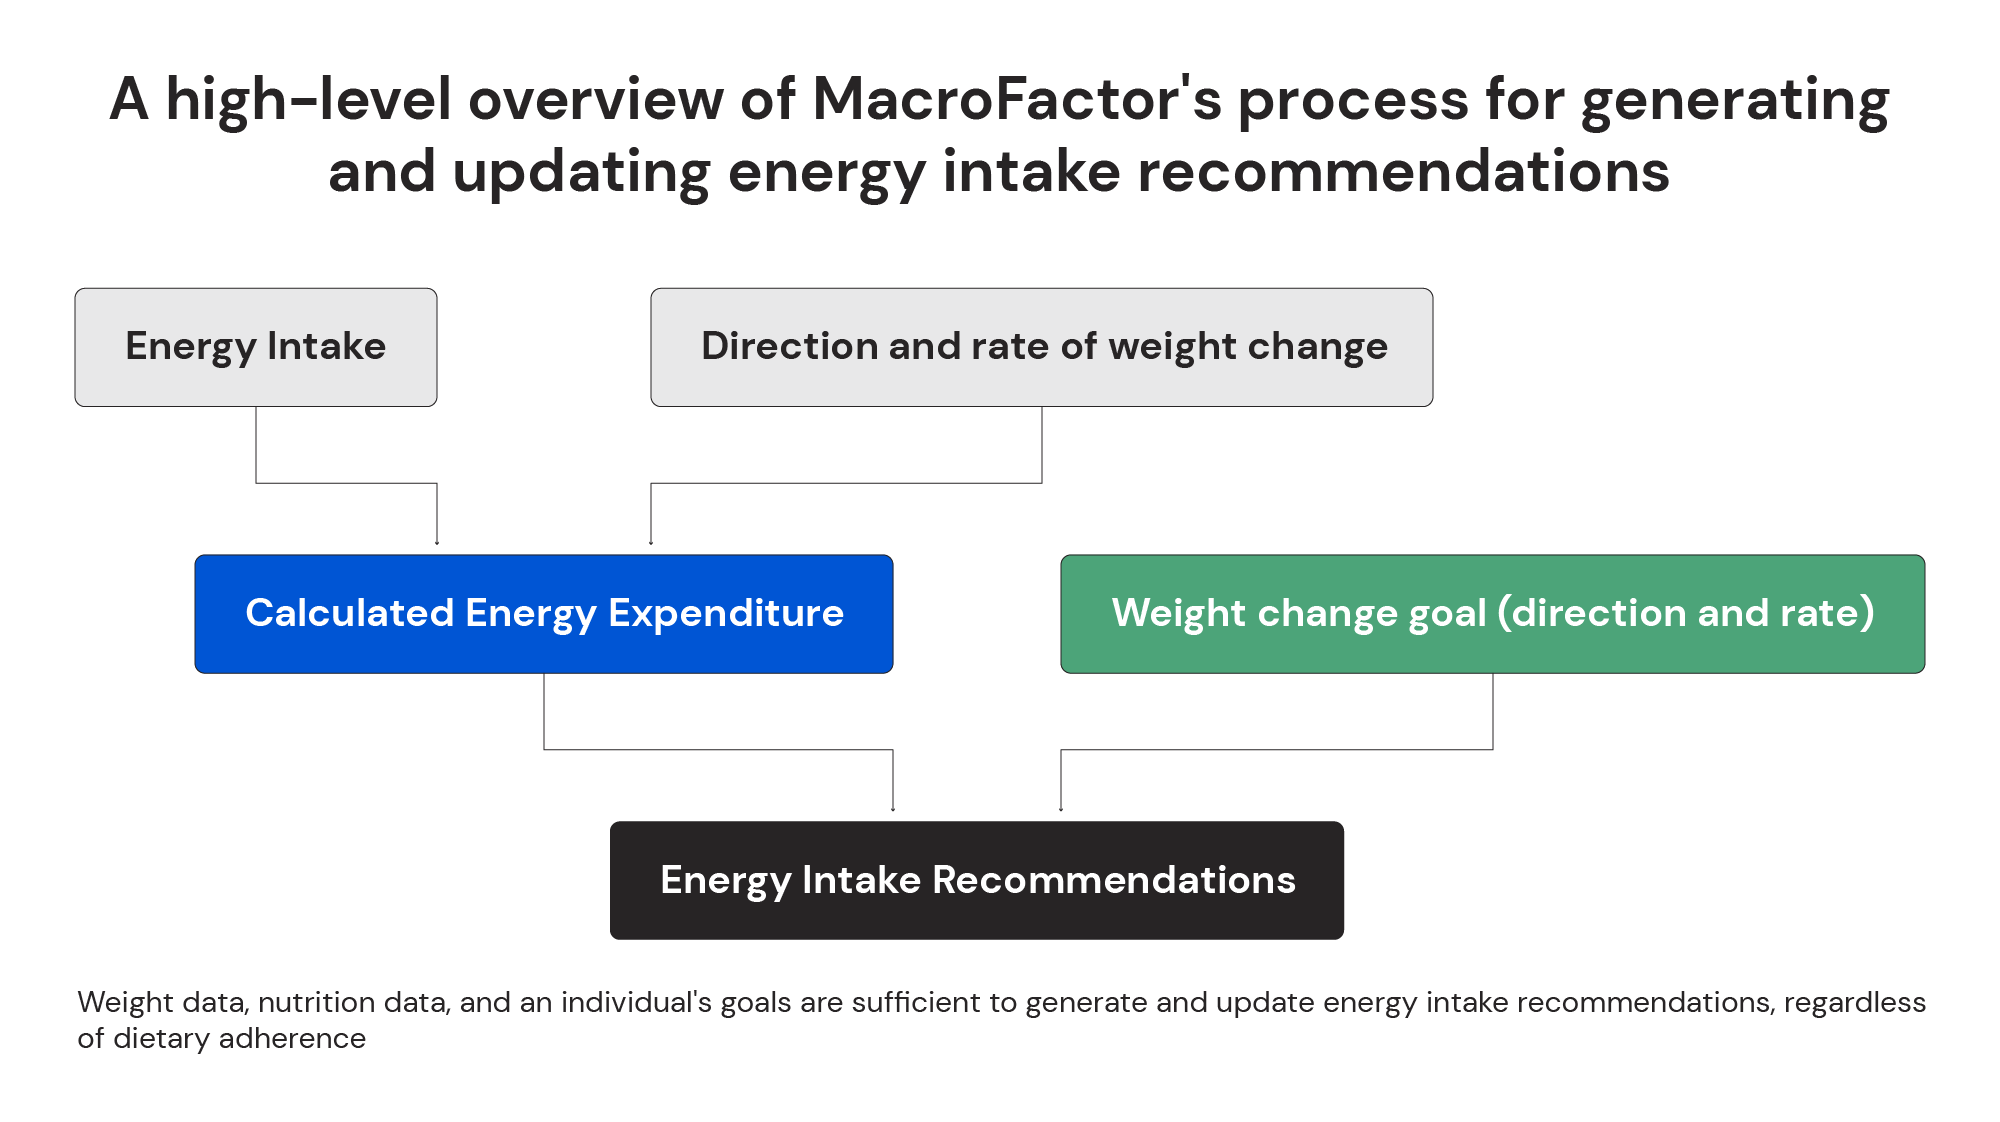 A high-level overview of MacroFactor's process for generating and updating energy intake recommendations